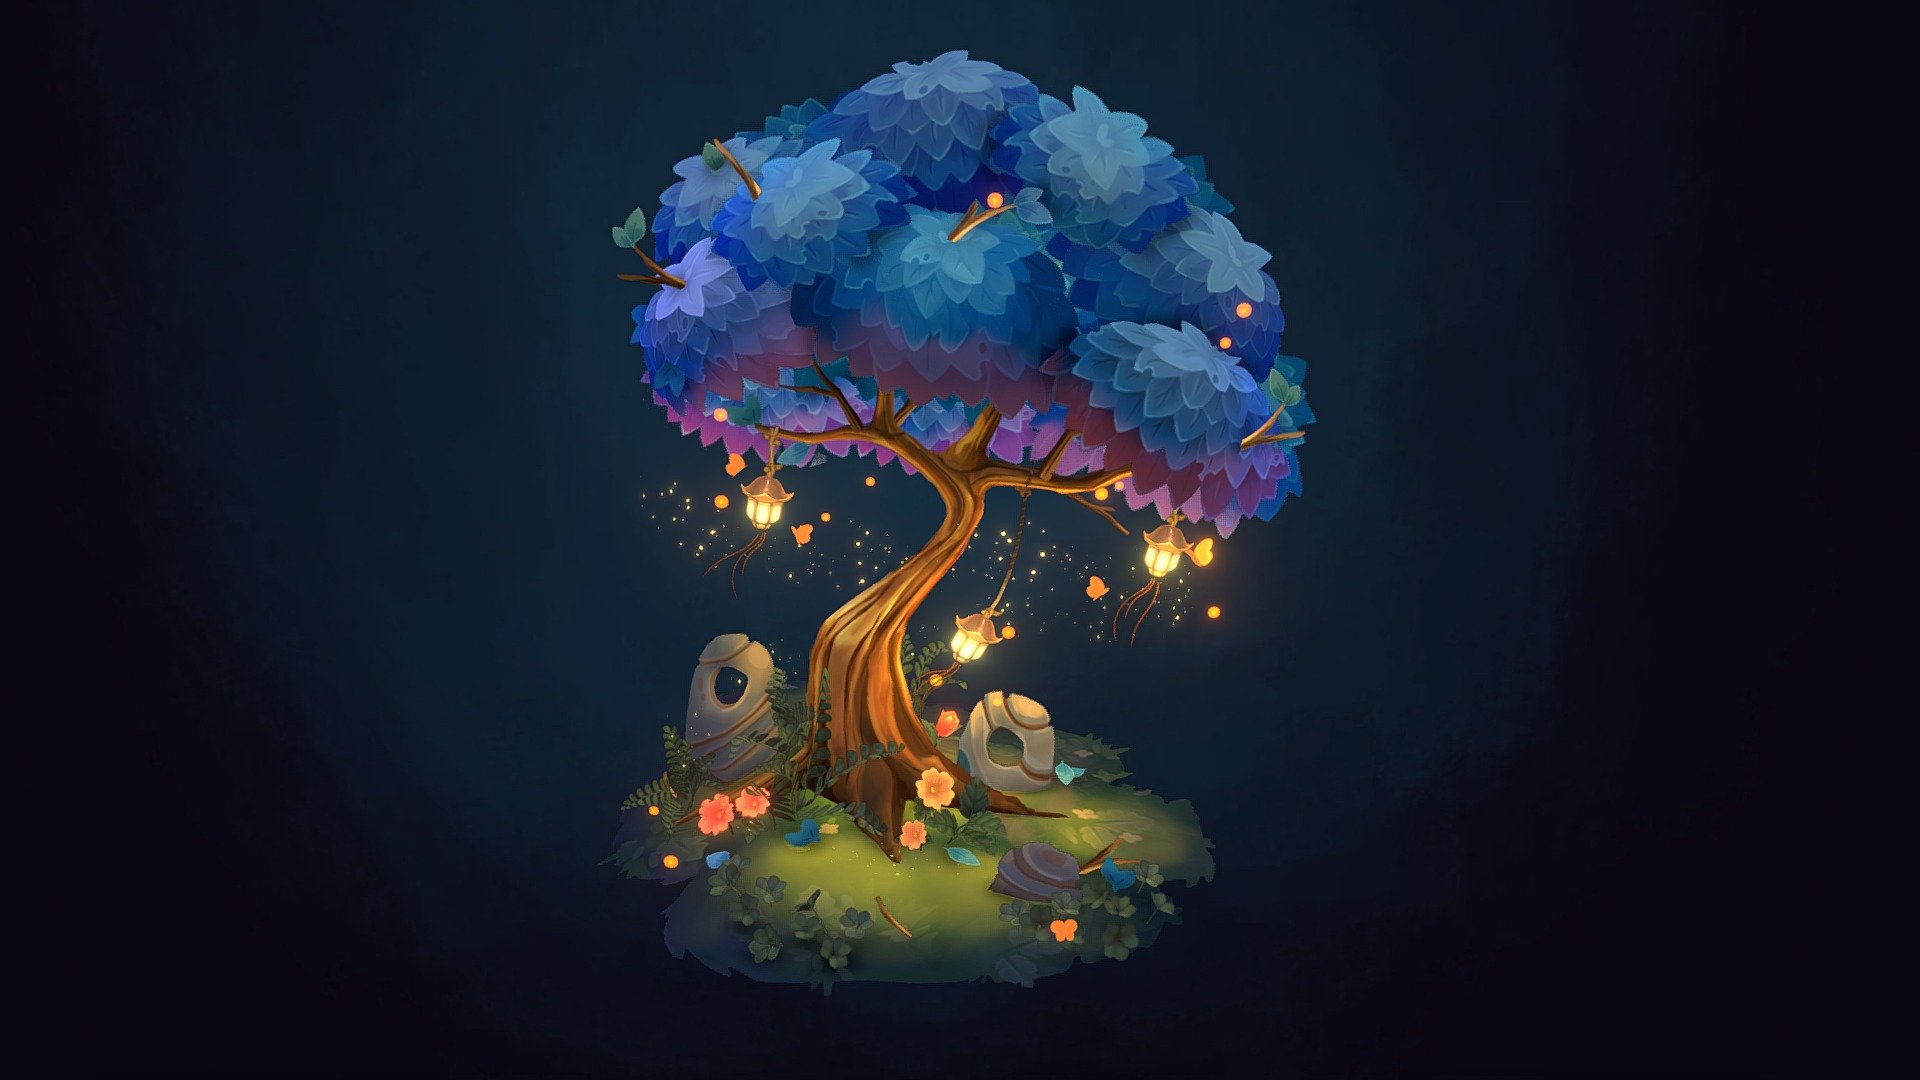 This is my project for the second week of the CGMA Stylized Game Assets course.

I chose to create a 2.5D stylized scene of a piece of magical nature during nighttime.
This was really fun, especially the little plants and flowers on the ground 3d model